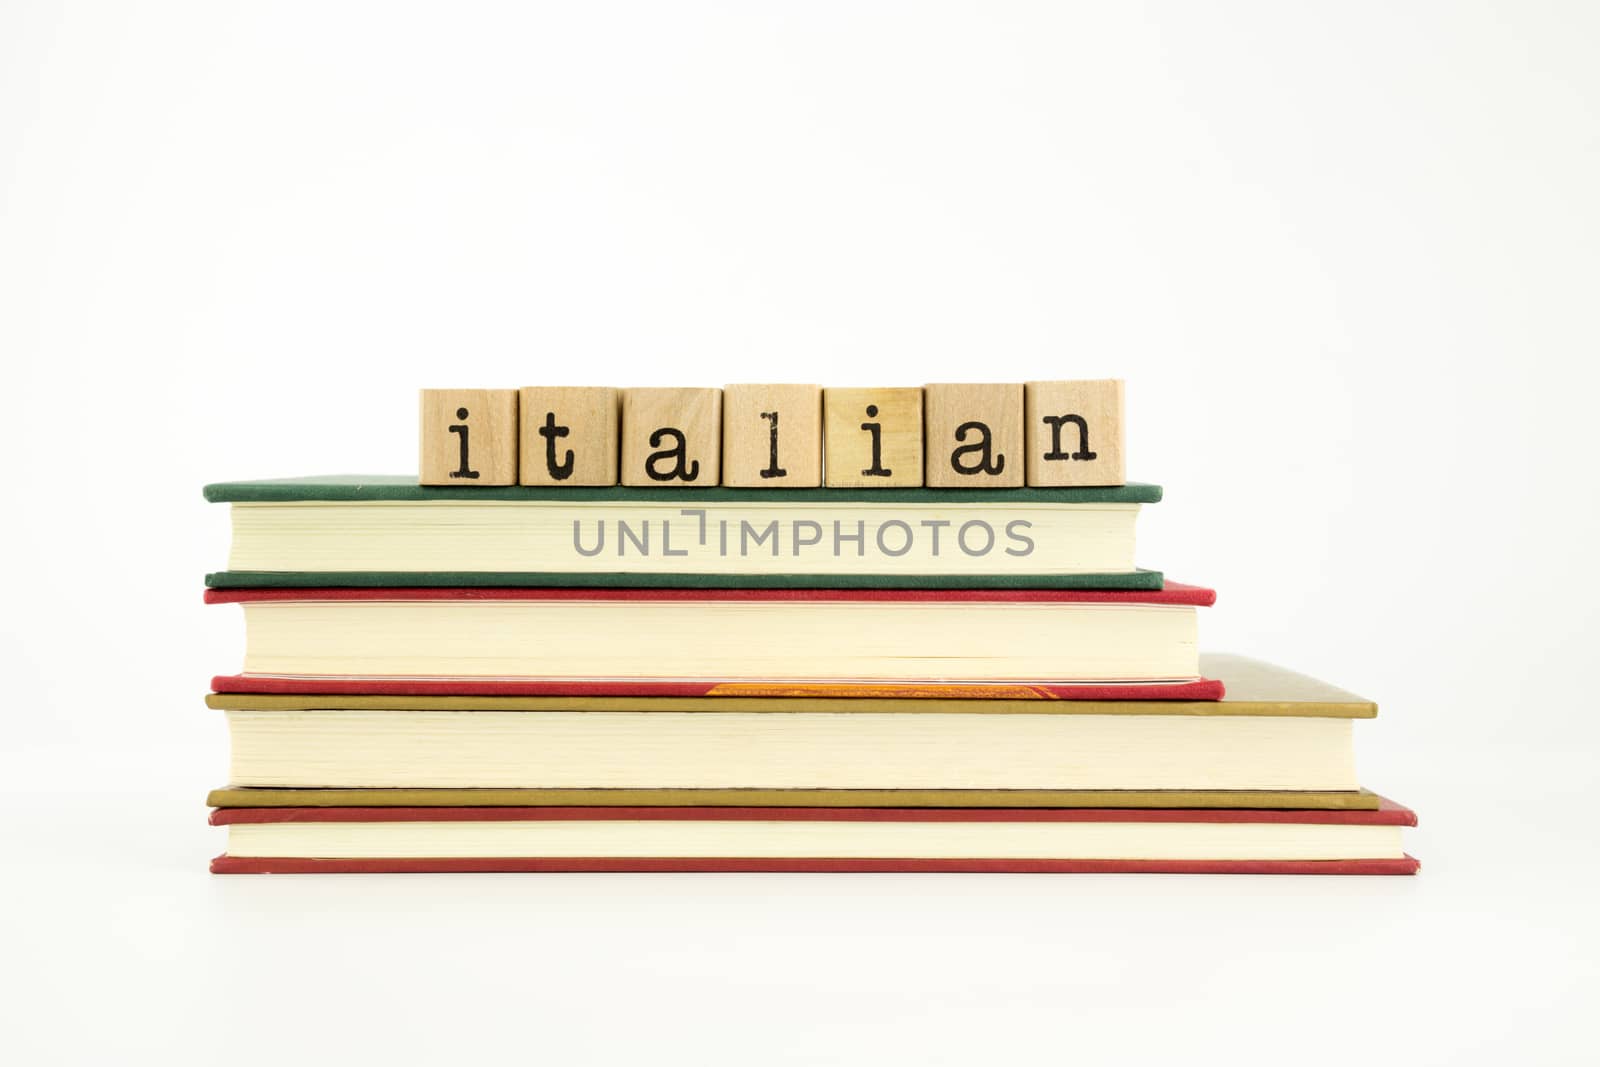 italian language word on wood stamps and books by vinnstock